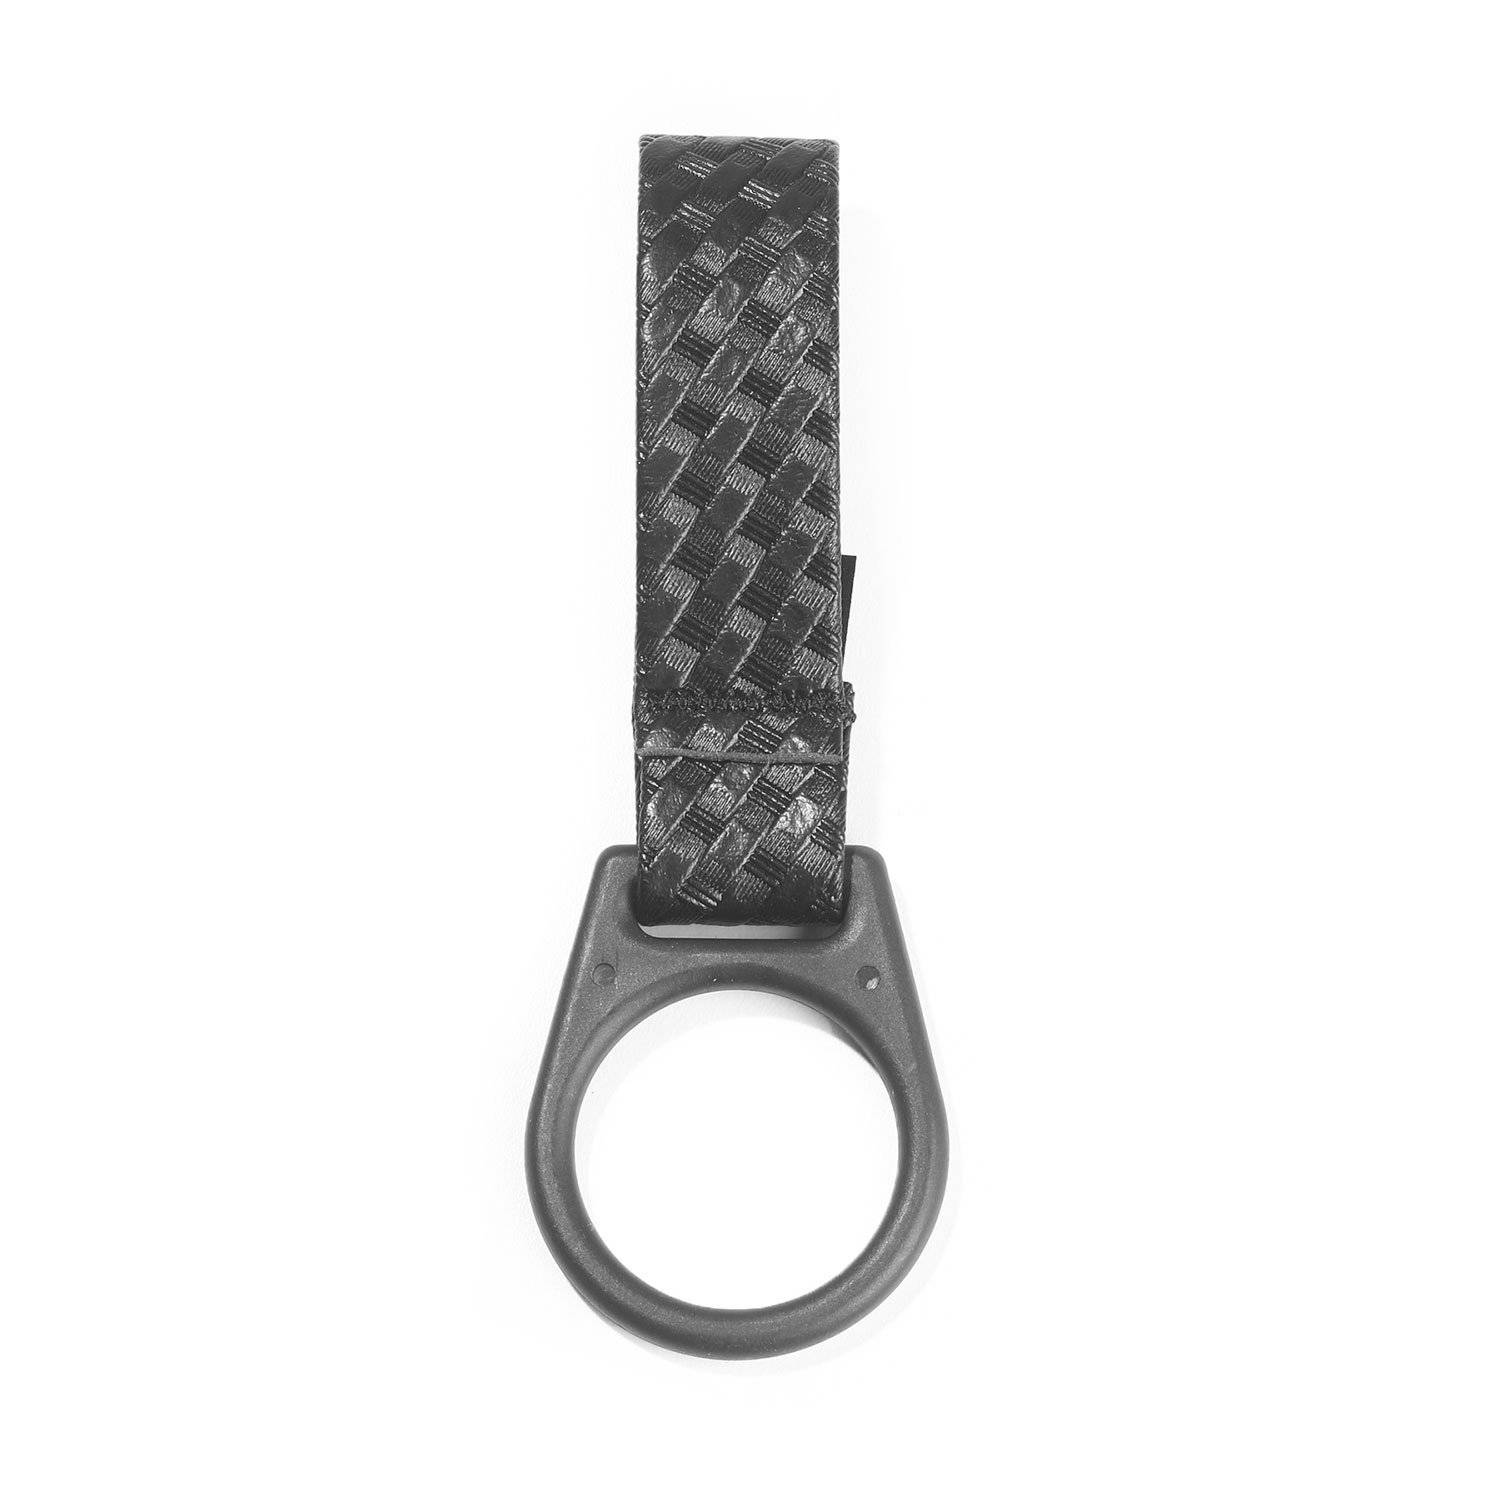 TUFF PRODUCTS STRAIGHT BATON OR C-CELL RING HOLDER